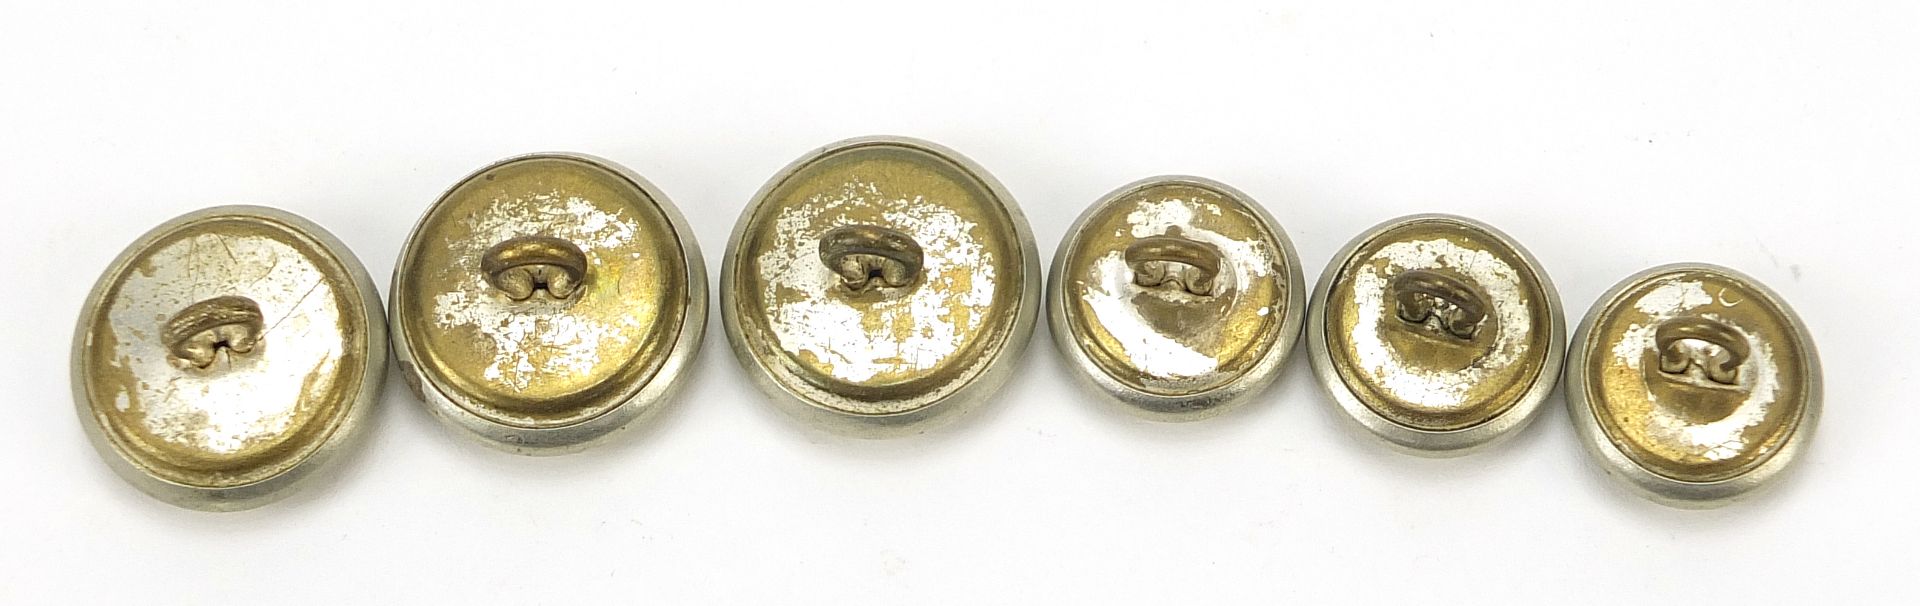 Six London Brighton And South Coast Railway buttons - Image 4 of 4